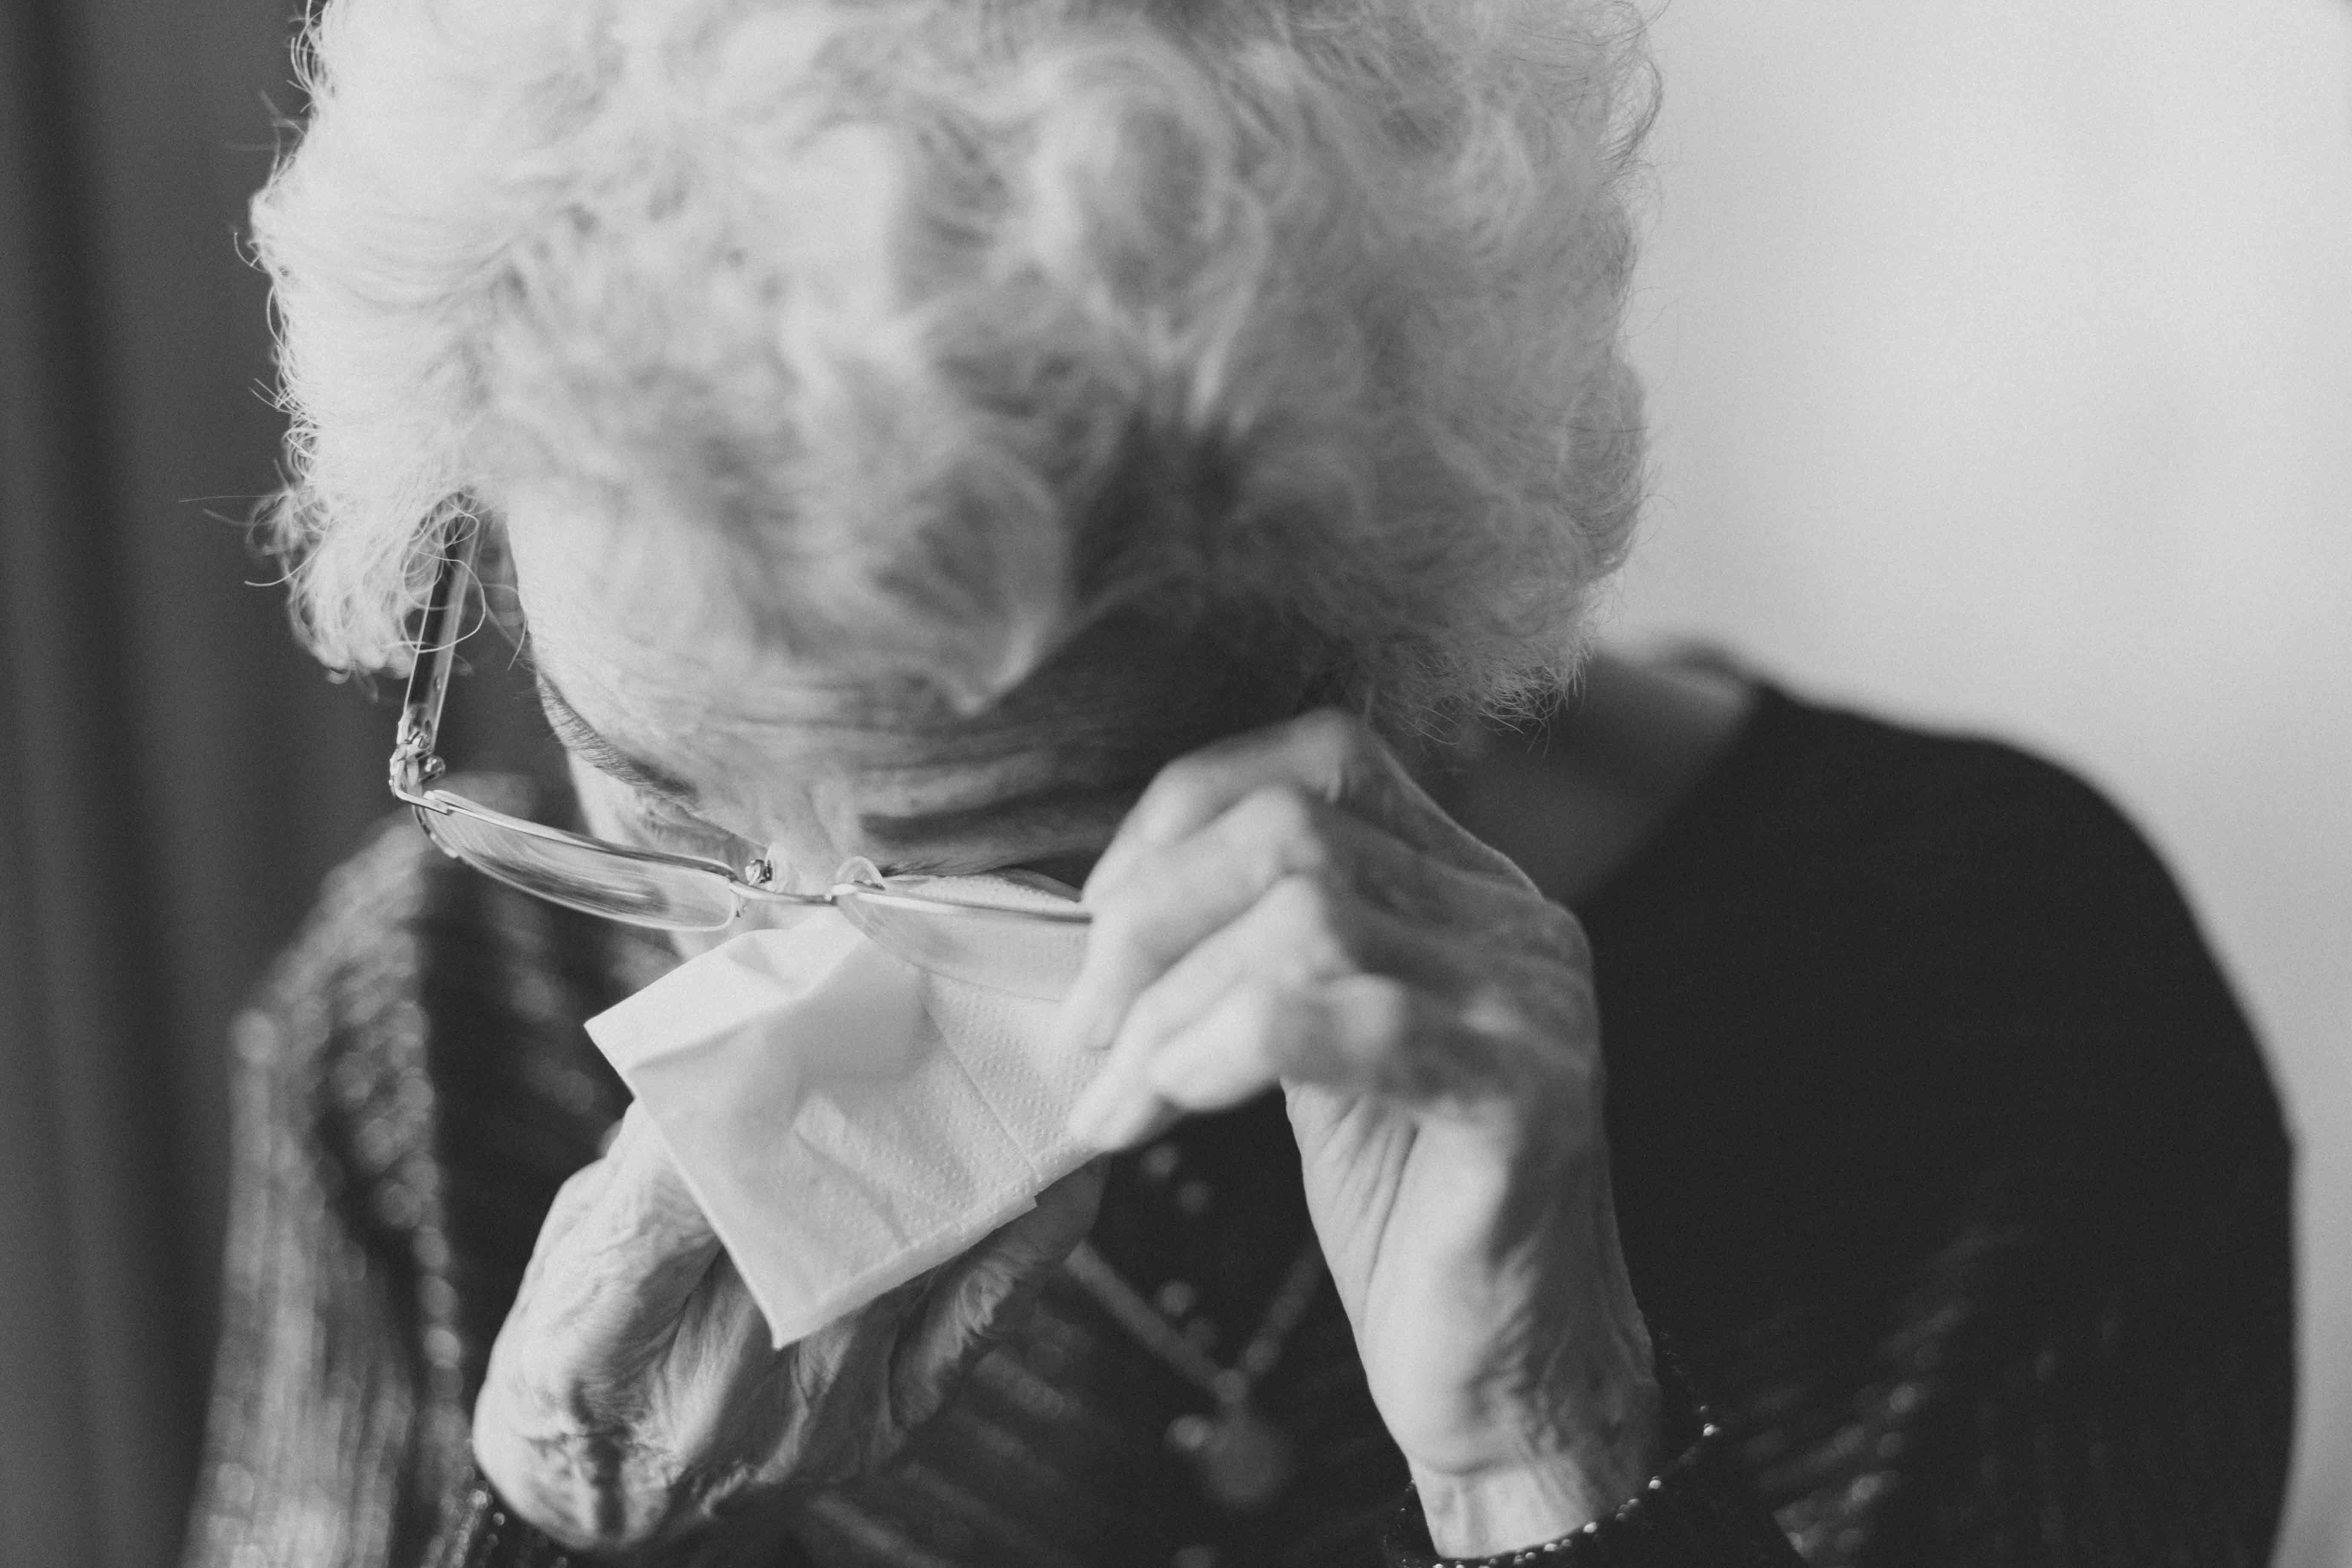 A woman wiping her eyes with a tissue | Source: Unsplash